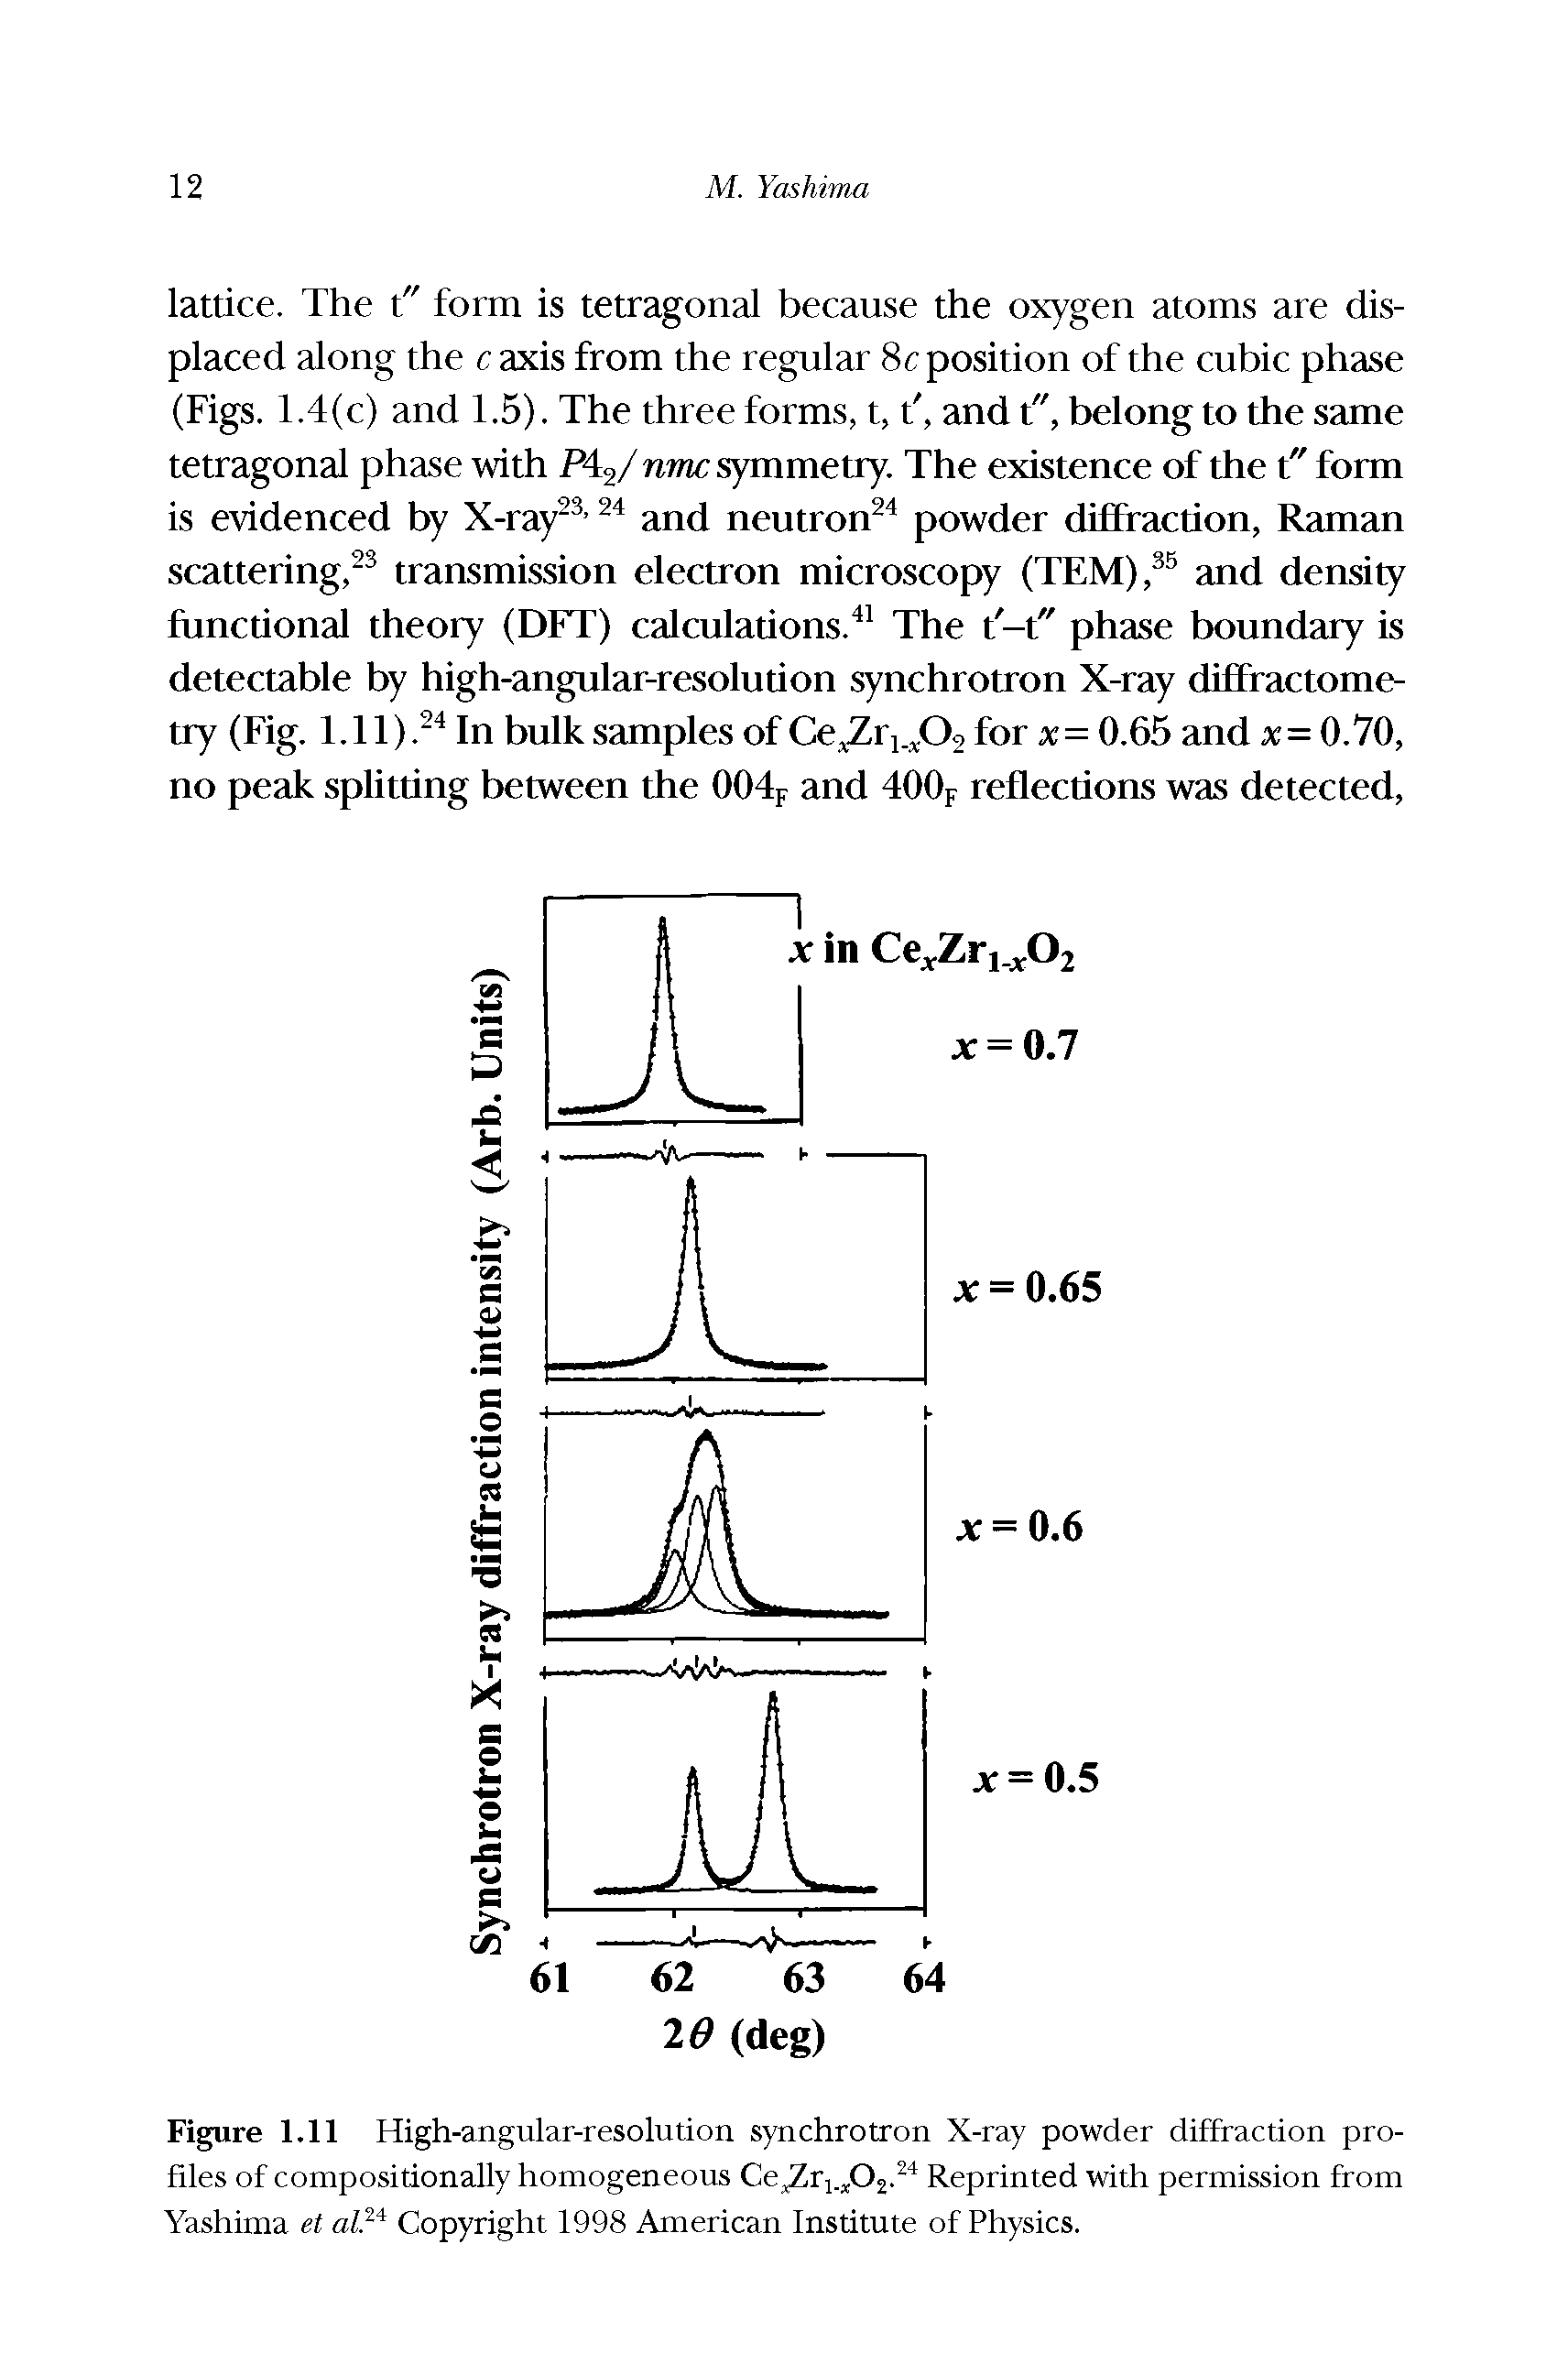 Figure 1.11 High-angular-resolution synchrotron X-ray powder diffraction profiles of compositionally homogeneous Ce Zrj. Oj. Reprinted with permission from Yashima et al Copyright 1998 American Institute of Physics.